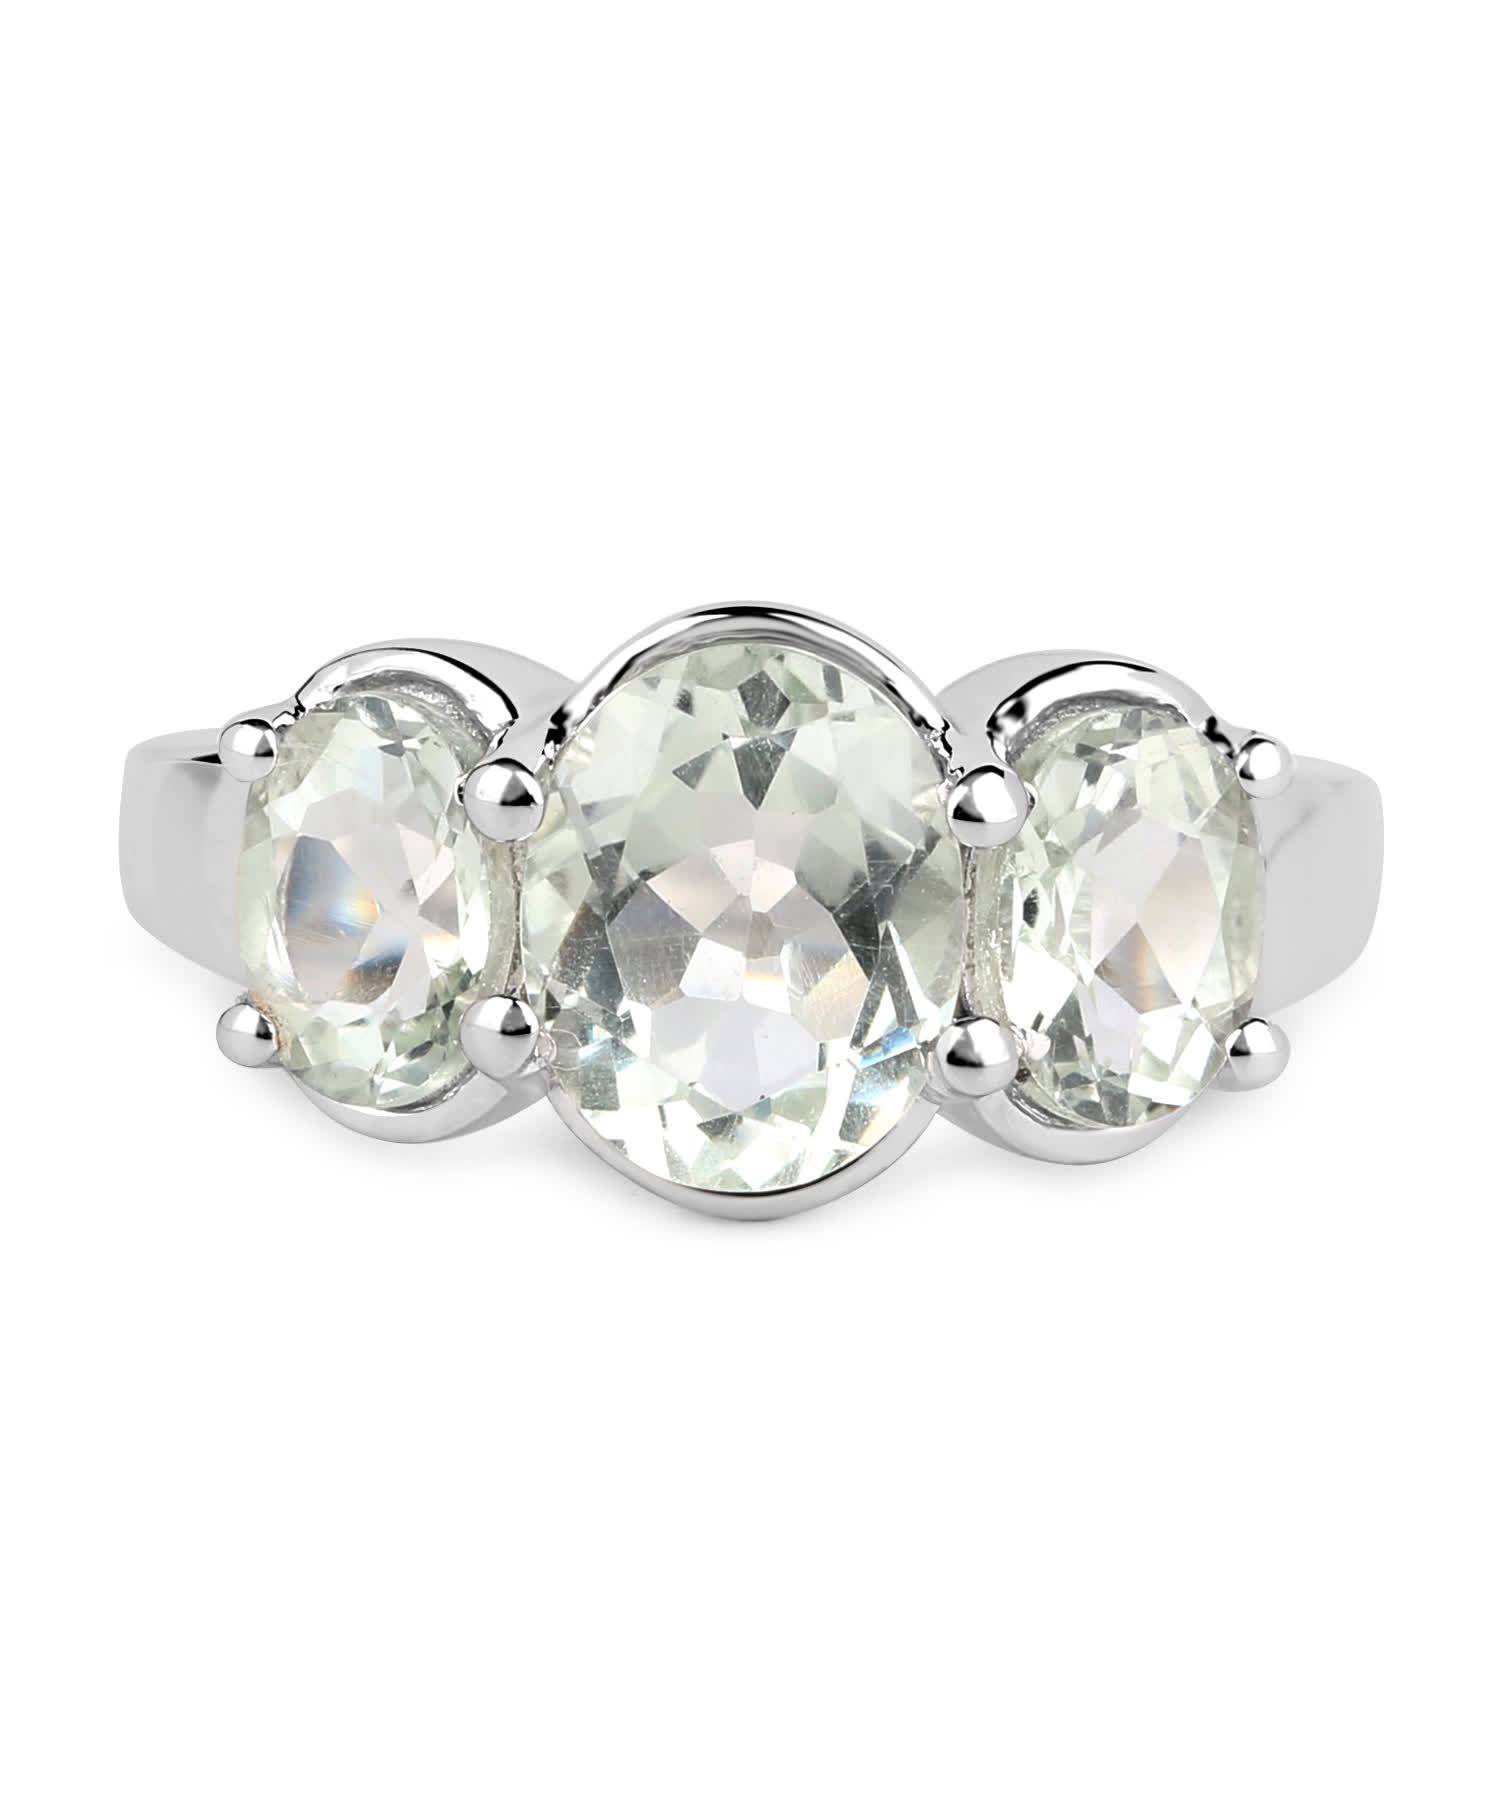 3.30ctw Natural Green Amethyst Rhodium Plated 925 Sterling Silver Three-Stone Ring View 3